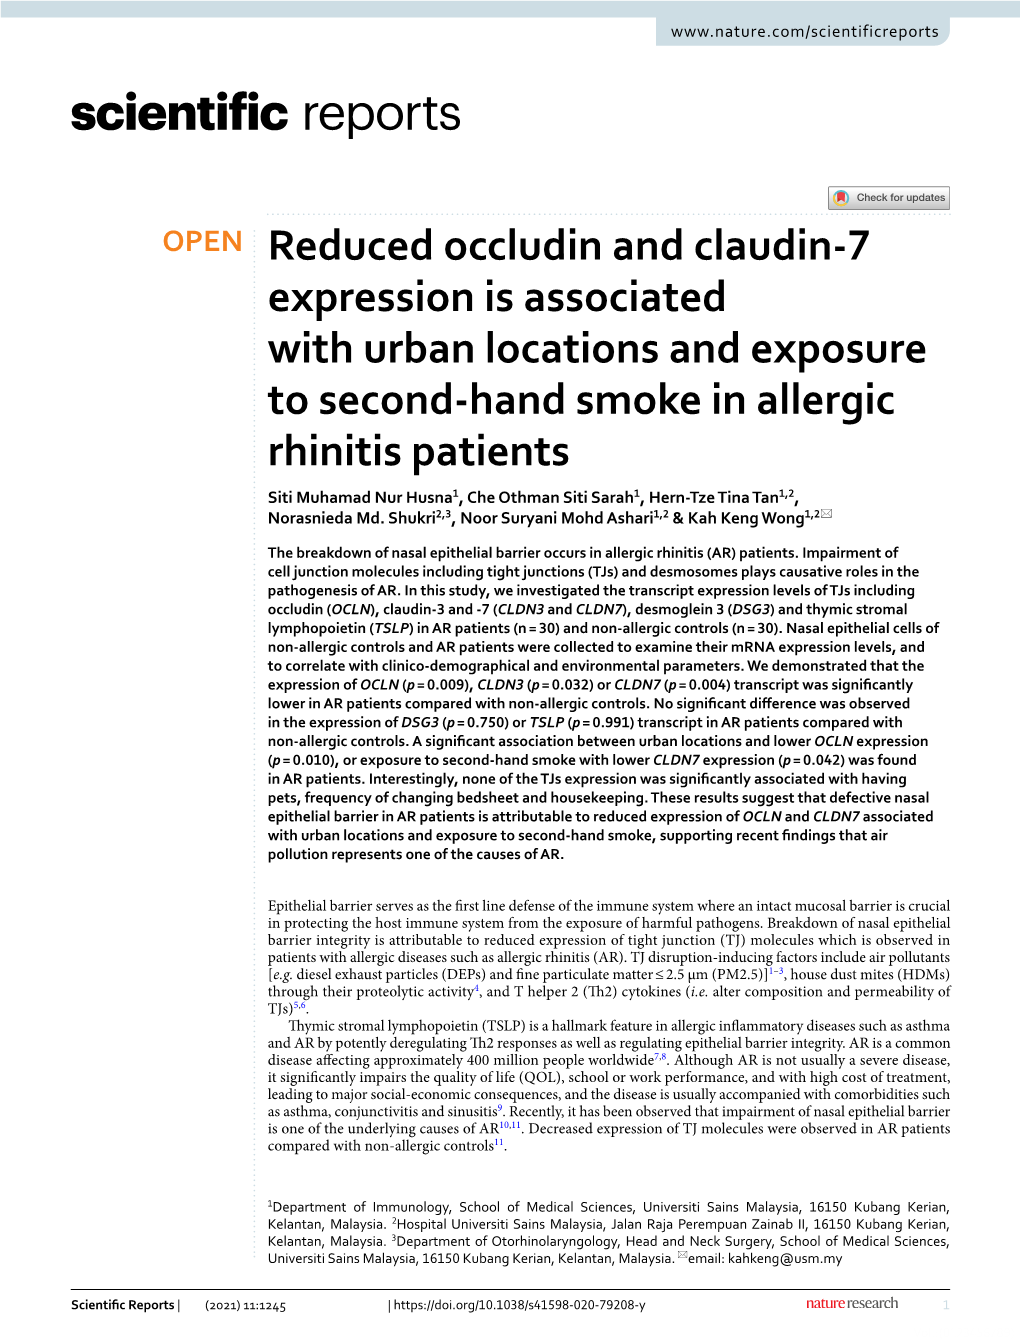 Reduced Occludin and Claudin-7 Expression Is Associated with Urban